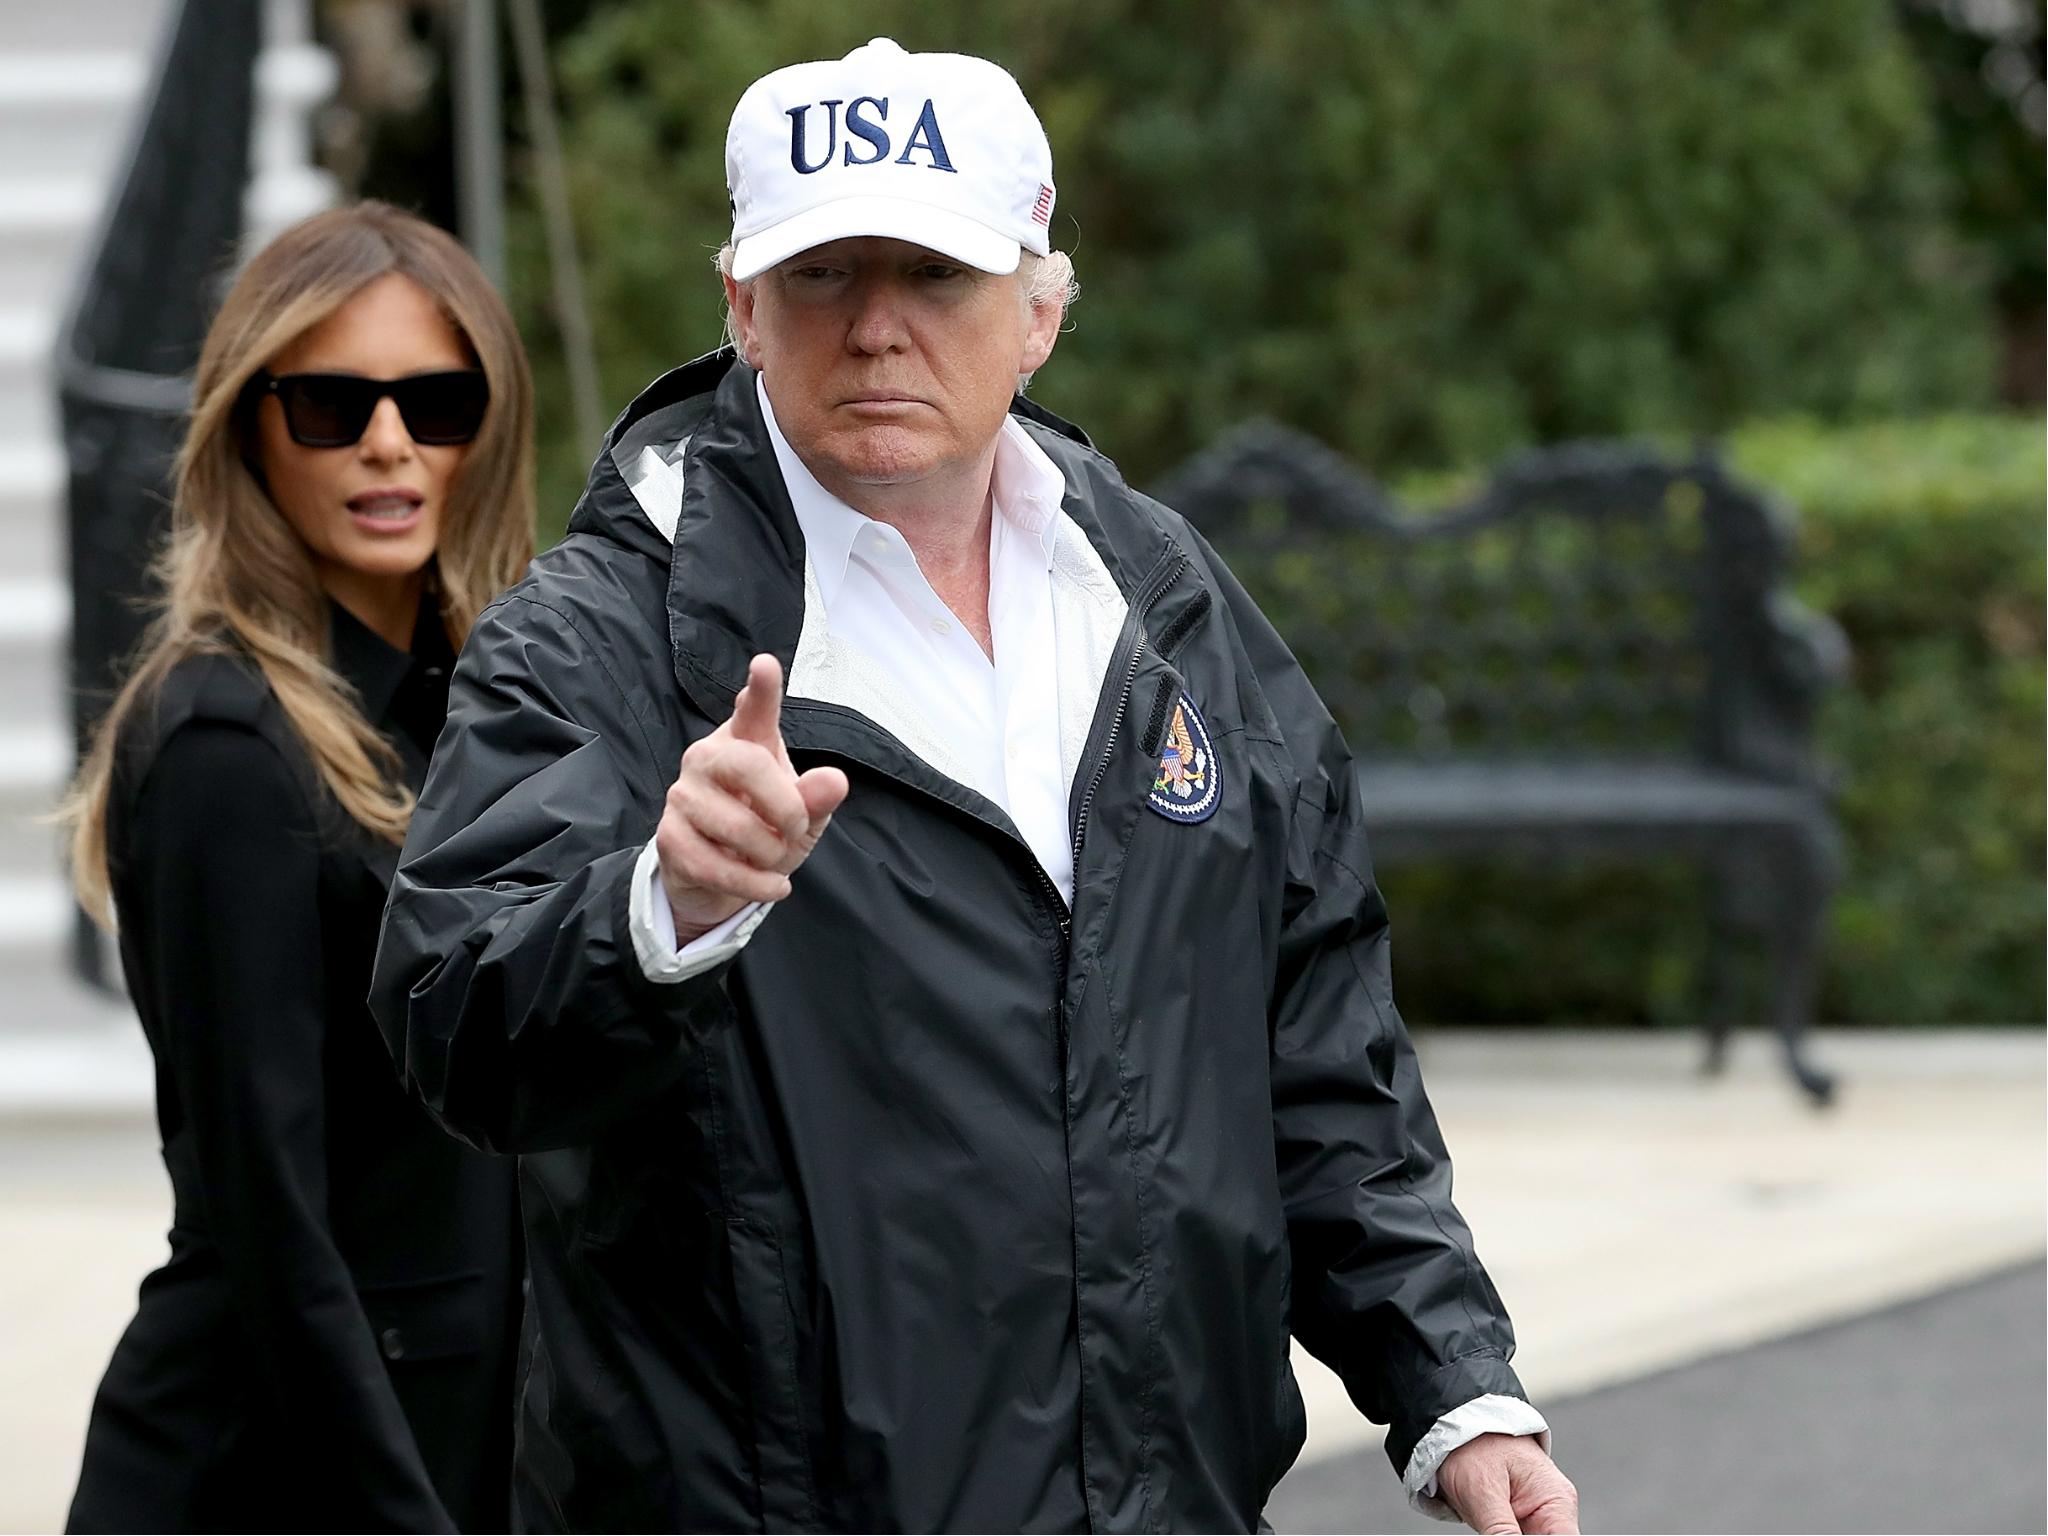 Donald Trump, with first lady Melania Trump, gestures as he answers questions while departing the White House for Florida on 14 September 2017